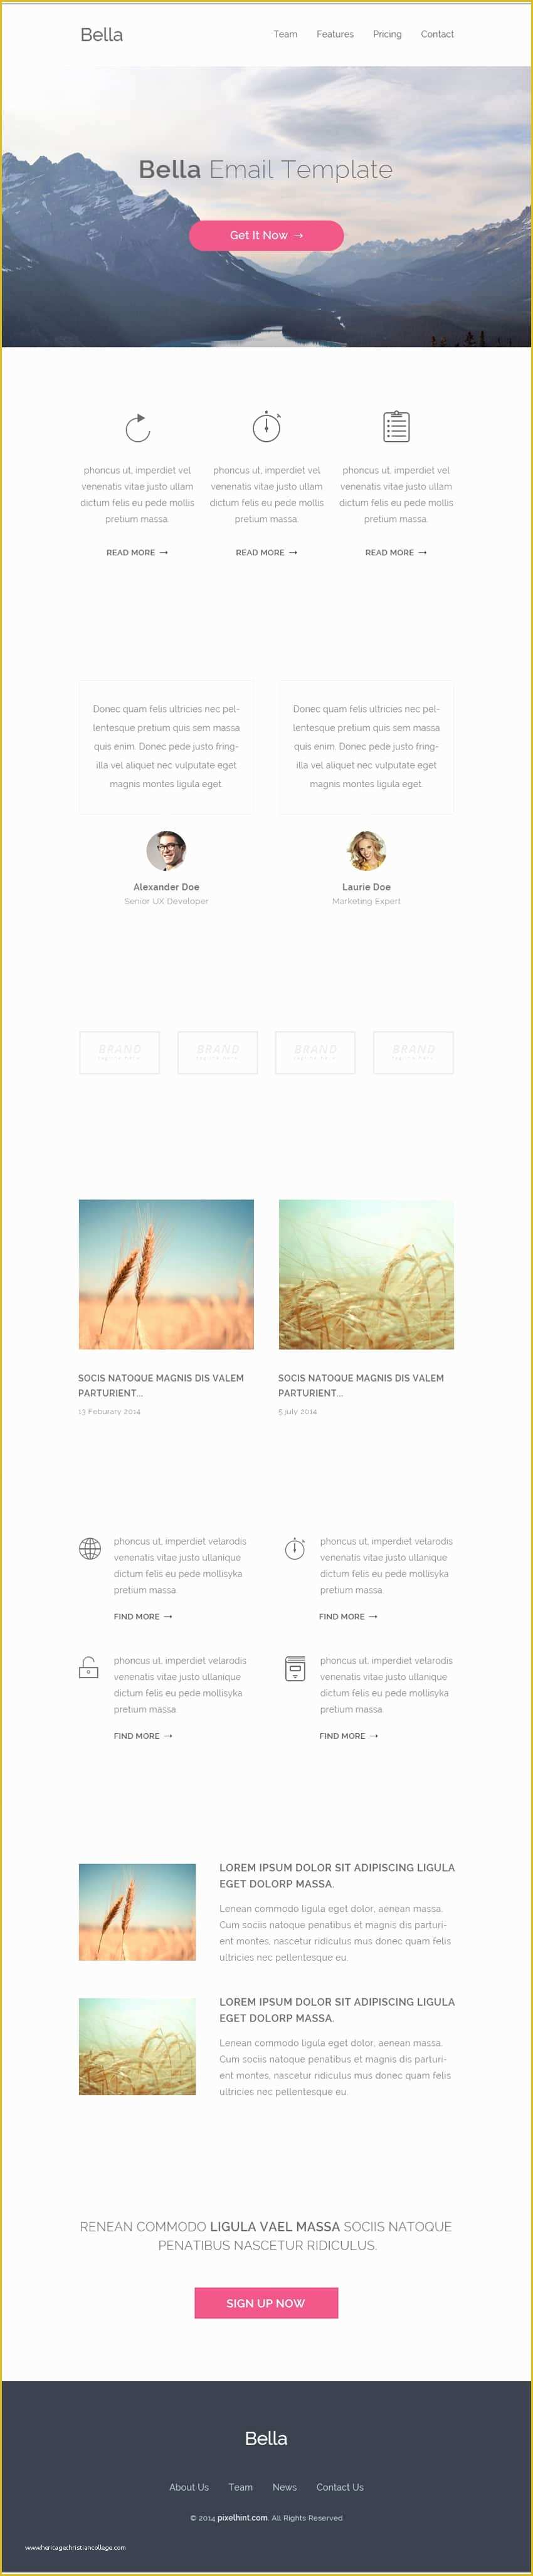 Free Video Email Templates Of Free Email Newsletter Templates Psd Css Author